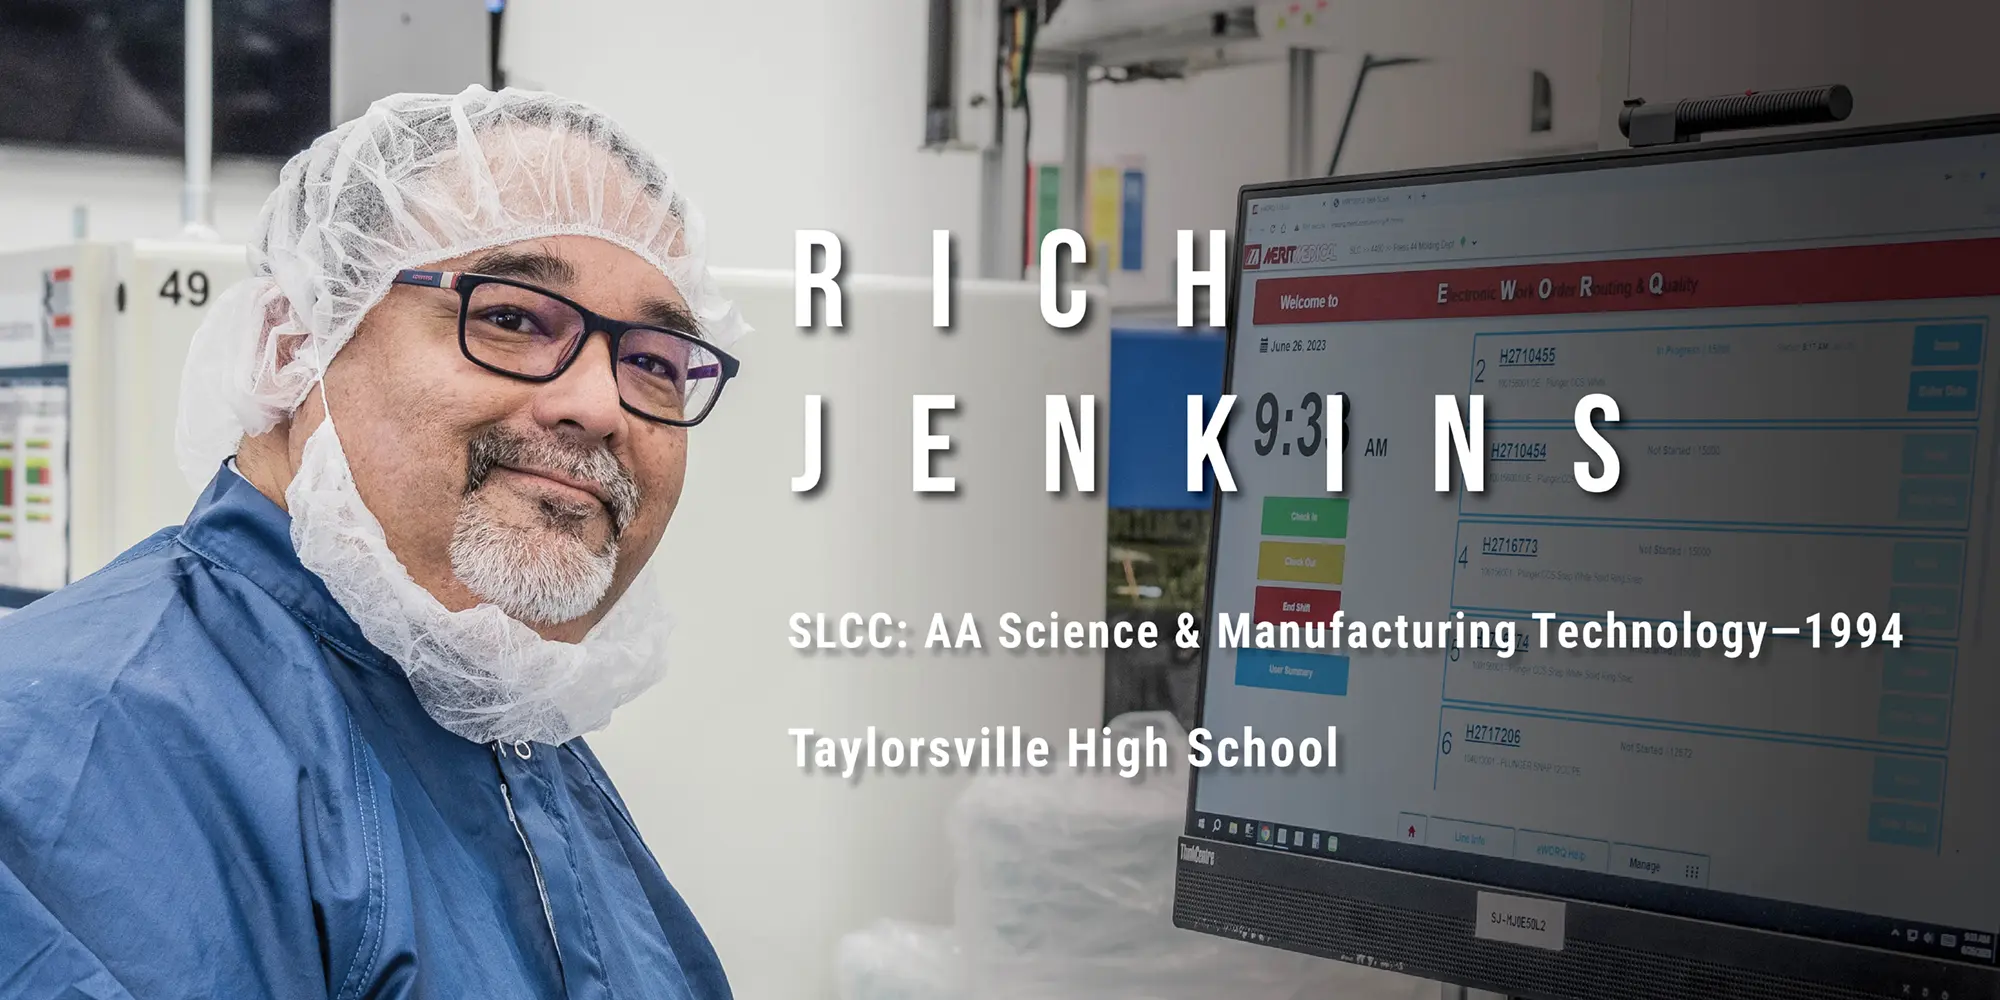 Rich Jenkins, SLCC AA Science and Manufacturing Technology in 1994, From Taylorsville High School